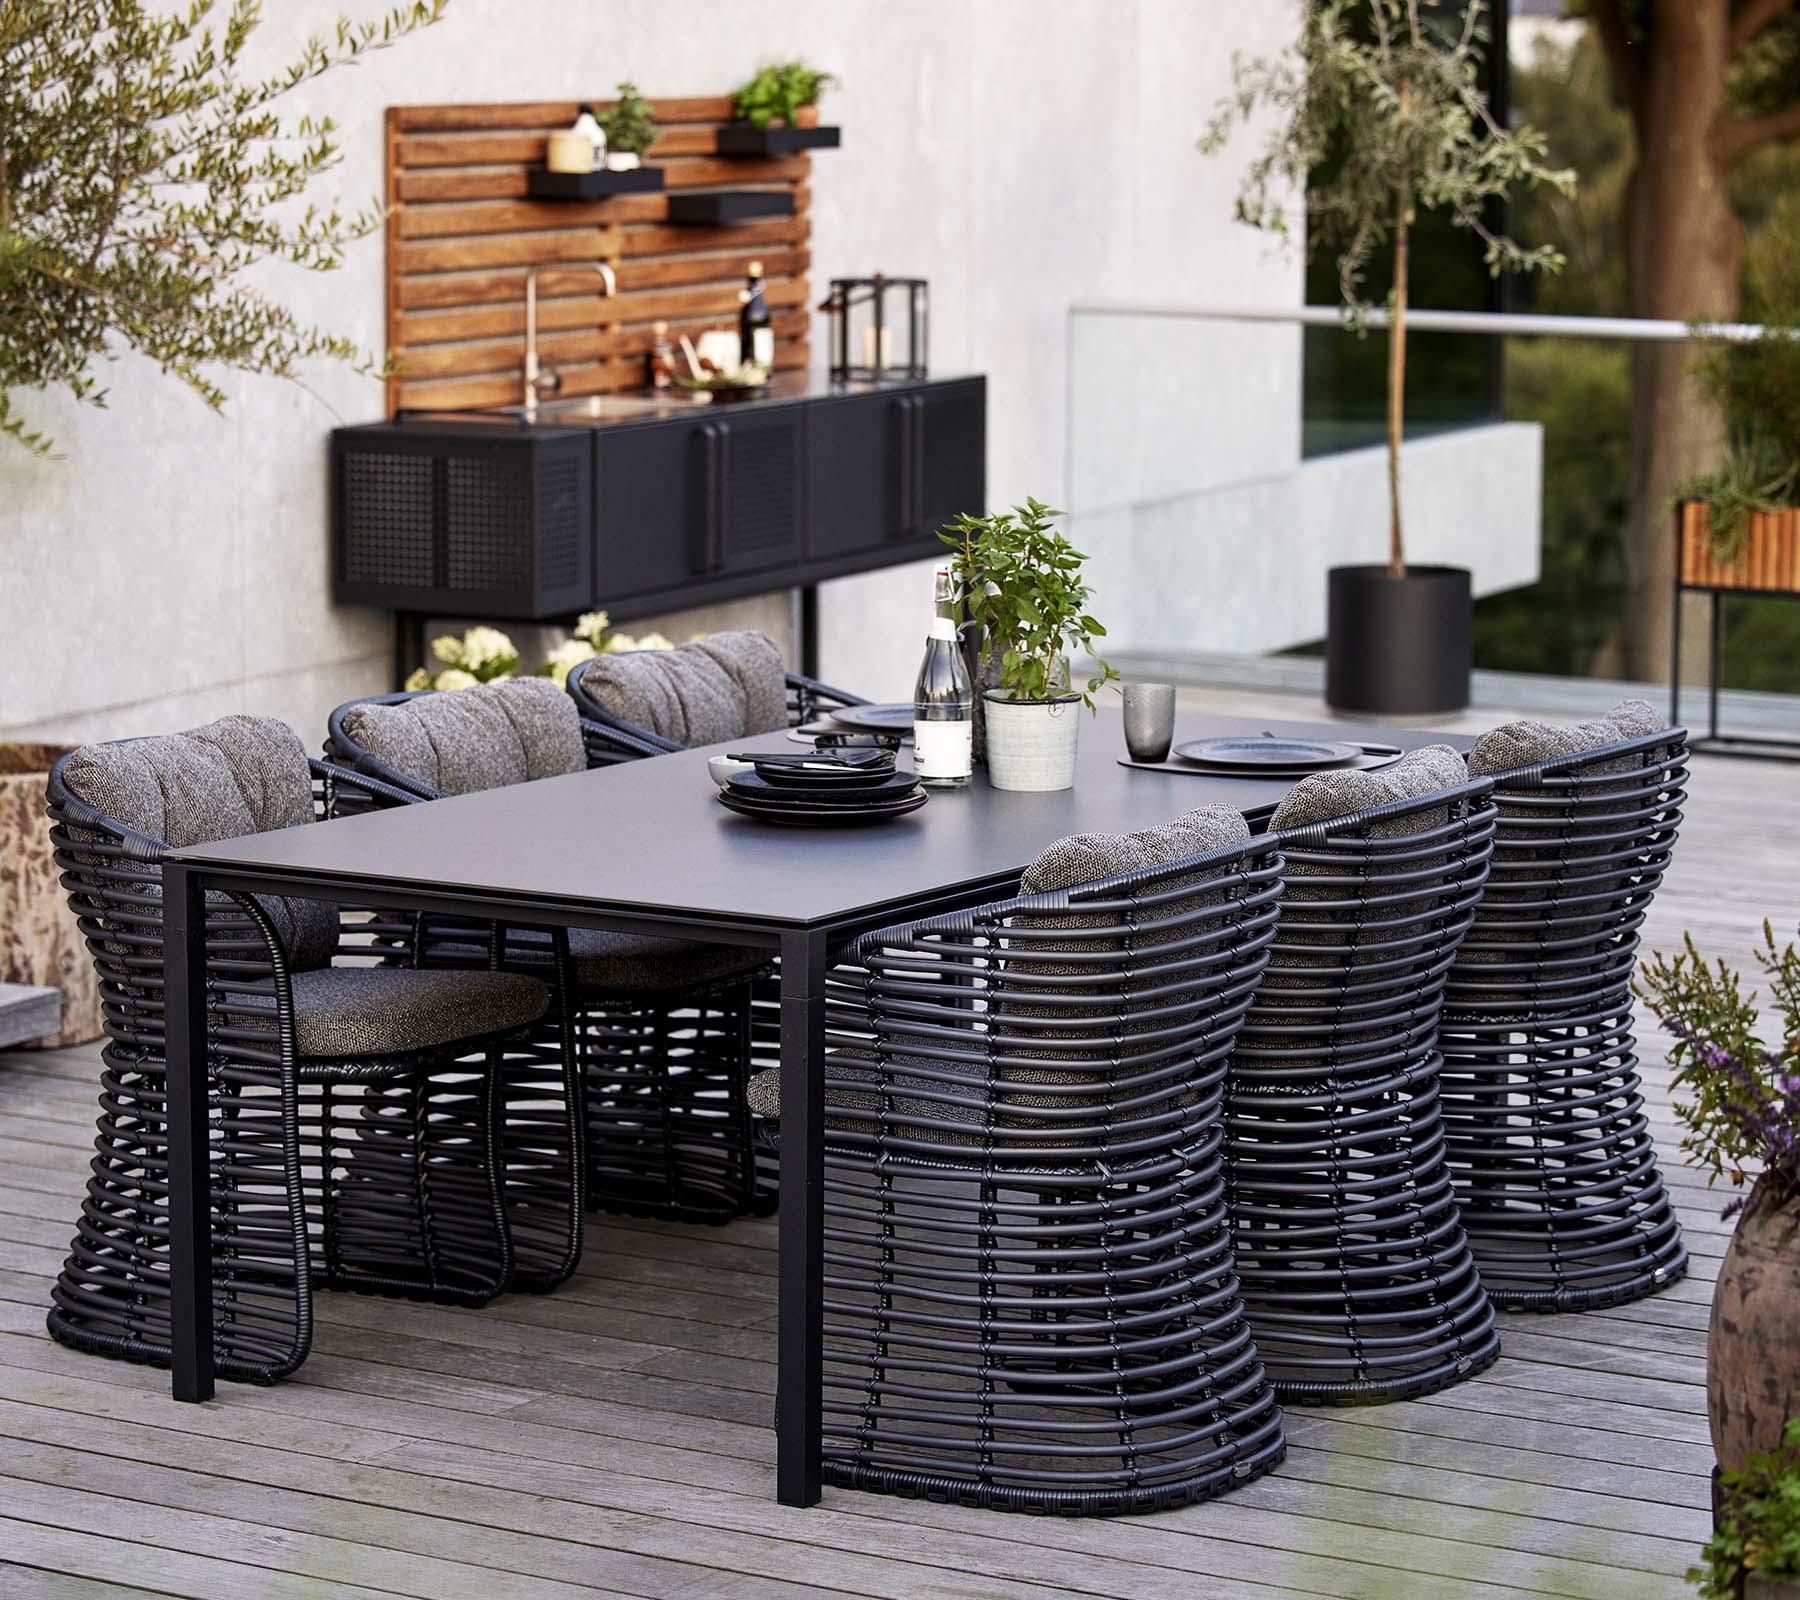 Boxhill's Basket Outdoor Dining Chair Graphite lifestyle image with Aspect dining table